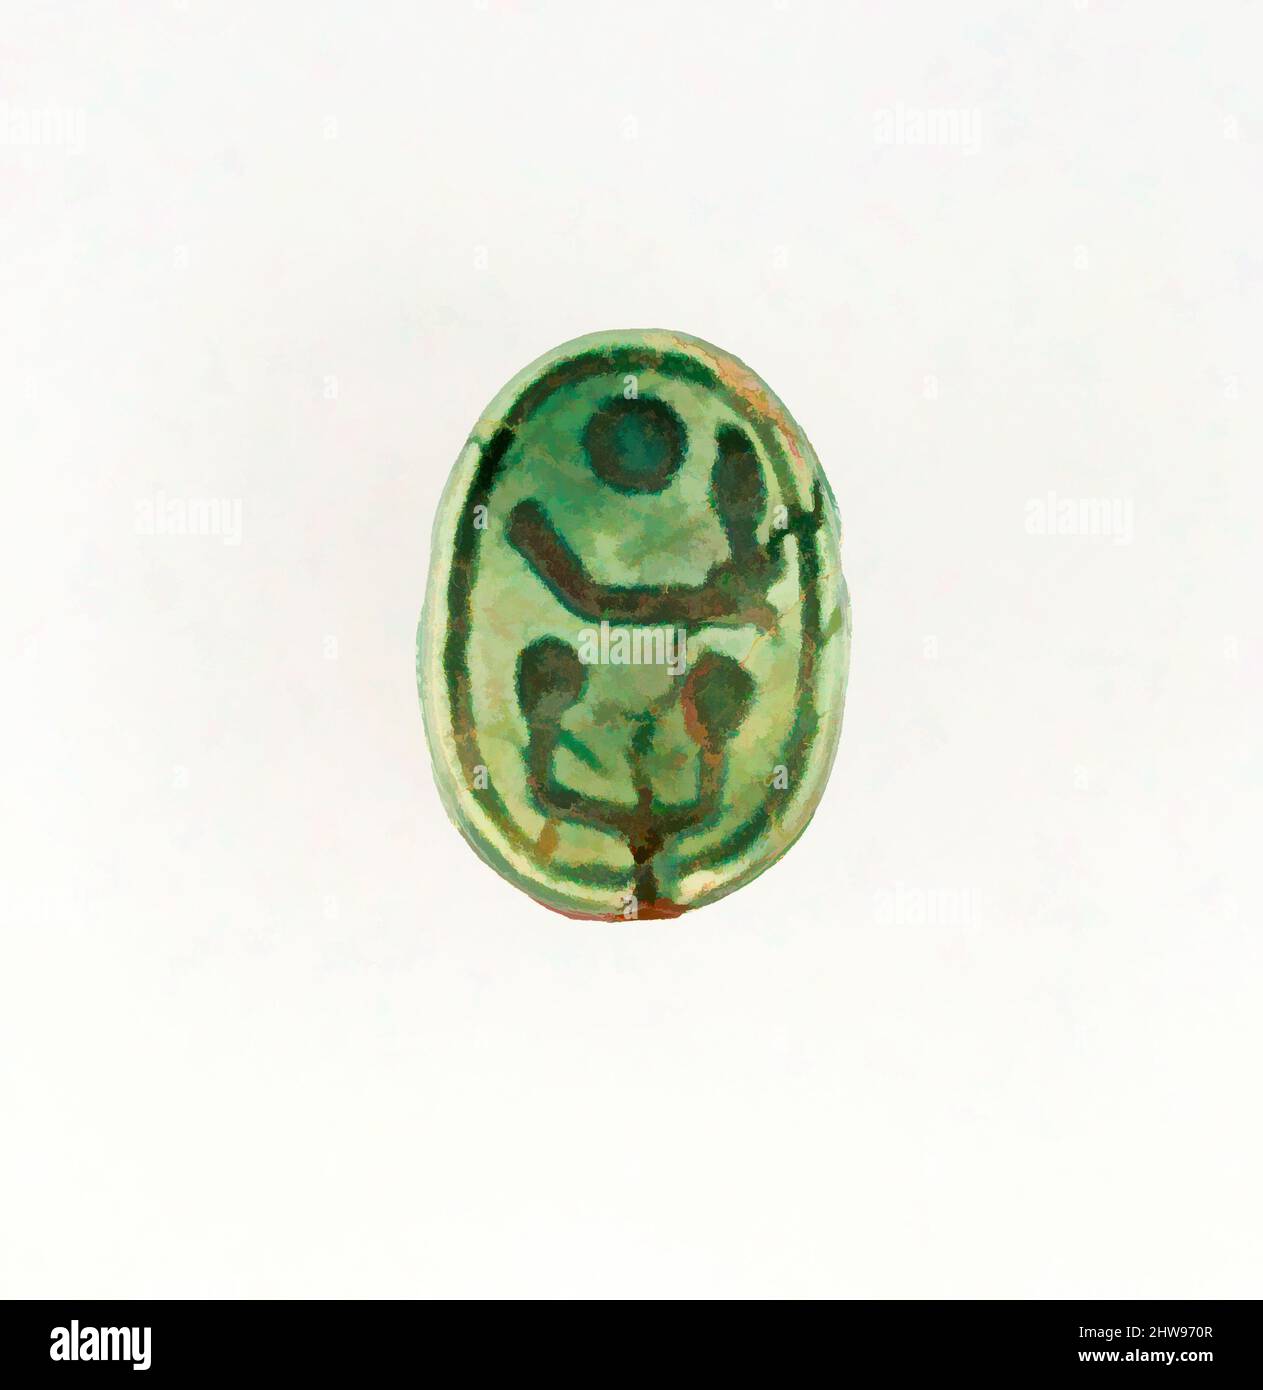 Art inspired by Scarab Inscribed with the Throne Name of Amenhotep I, New Kingdom, Dynasty 18, ca. 1525–1504 B.C., From Egypt, Steatite, glazed, l. 1.4 cm ( 9/16 in); w. 1 cm (3/8 in, Classic works modernized by Artotop with a splash of modernity. Shapes, color and value, eye-catching visual impact on art. Emotions through freedom of artworks in a contemporary way. A timeless message pursuing a wildly creative new direction. Artists turning to the digital medium and creating the Artotop NFT Stock Photo